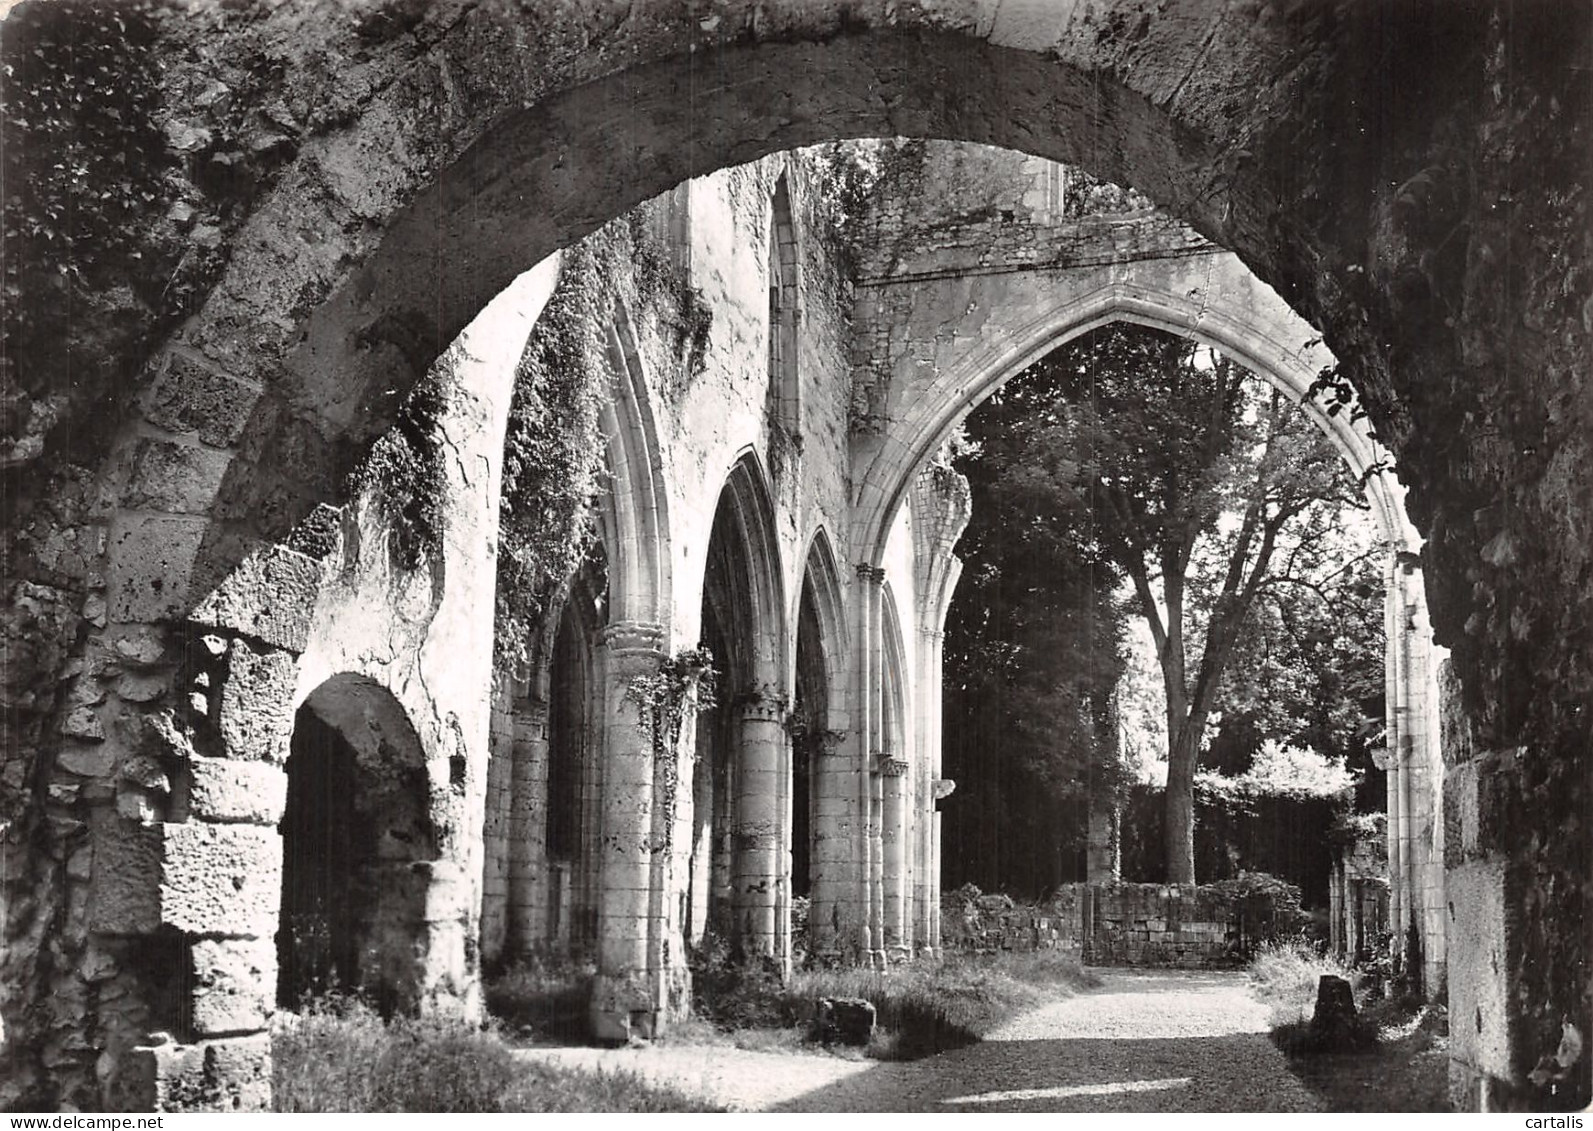 76-JUMIEGES-N° 4400-C/0003 - Jumieges